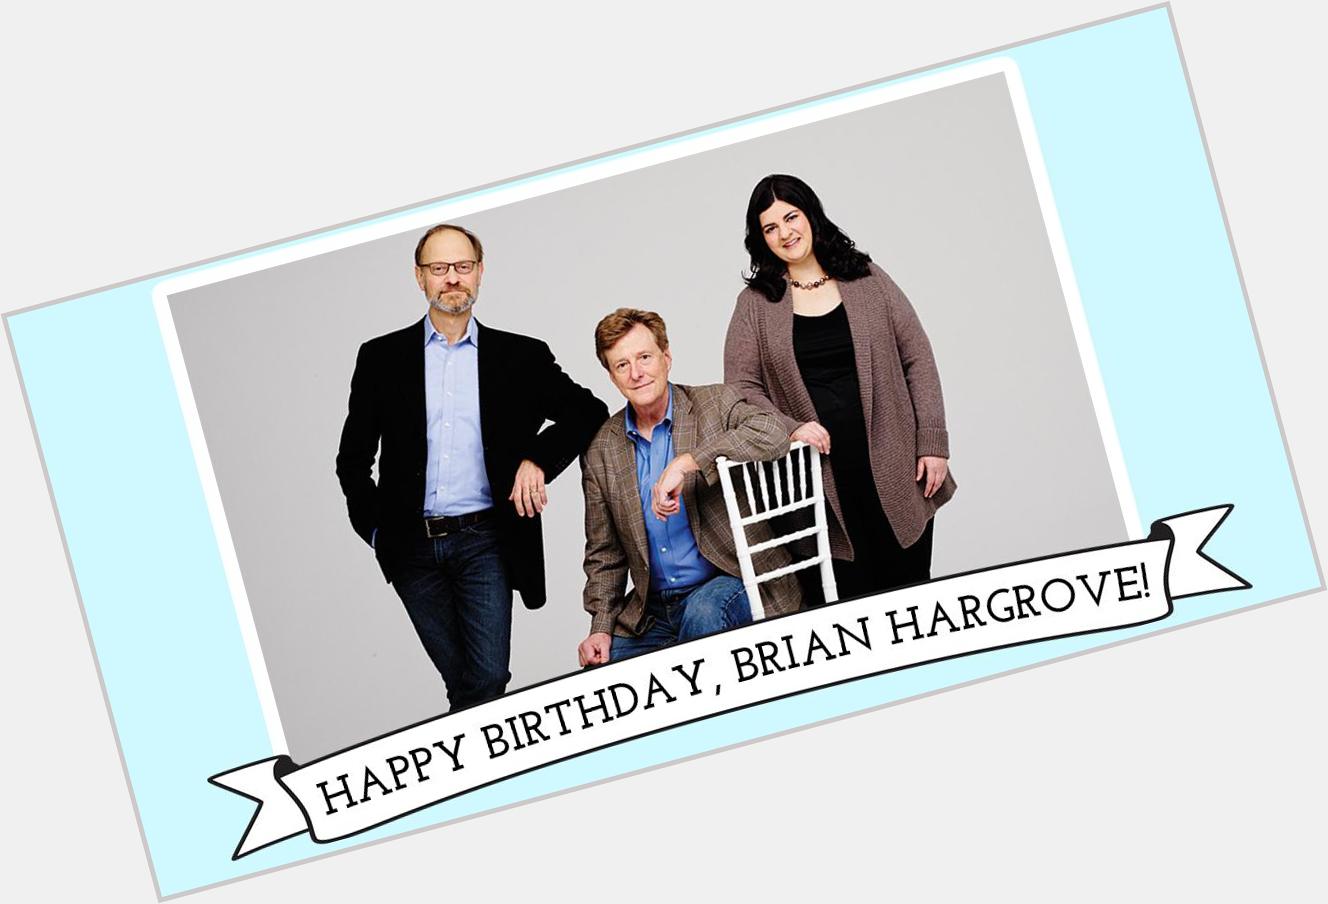 Happy birthday to our wonderful book writer, Brian Hargrove! We hope you\re surrounded by your loved ones today! 